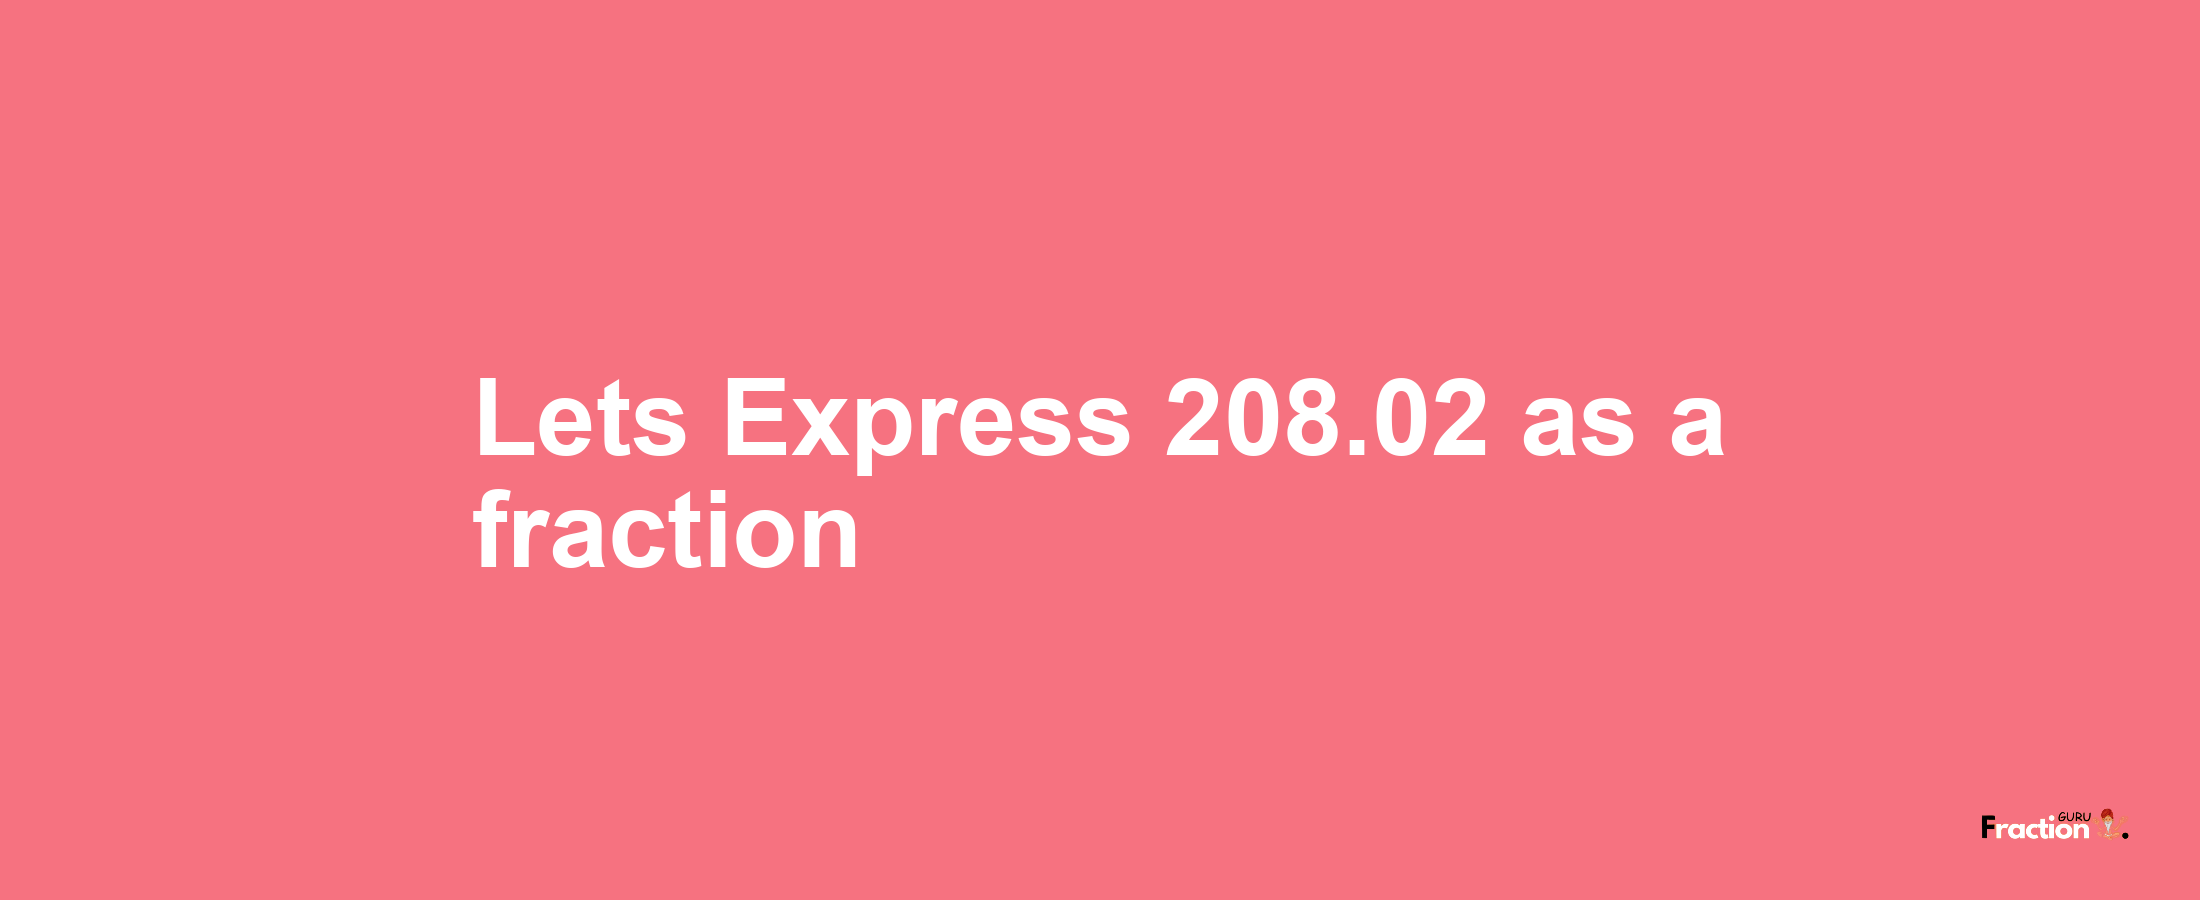 Lets Express 208.02 as afraction